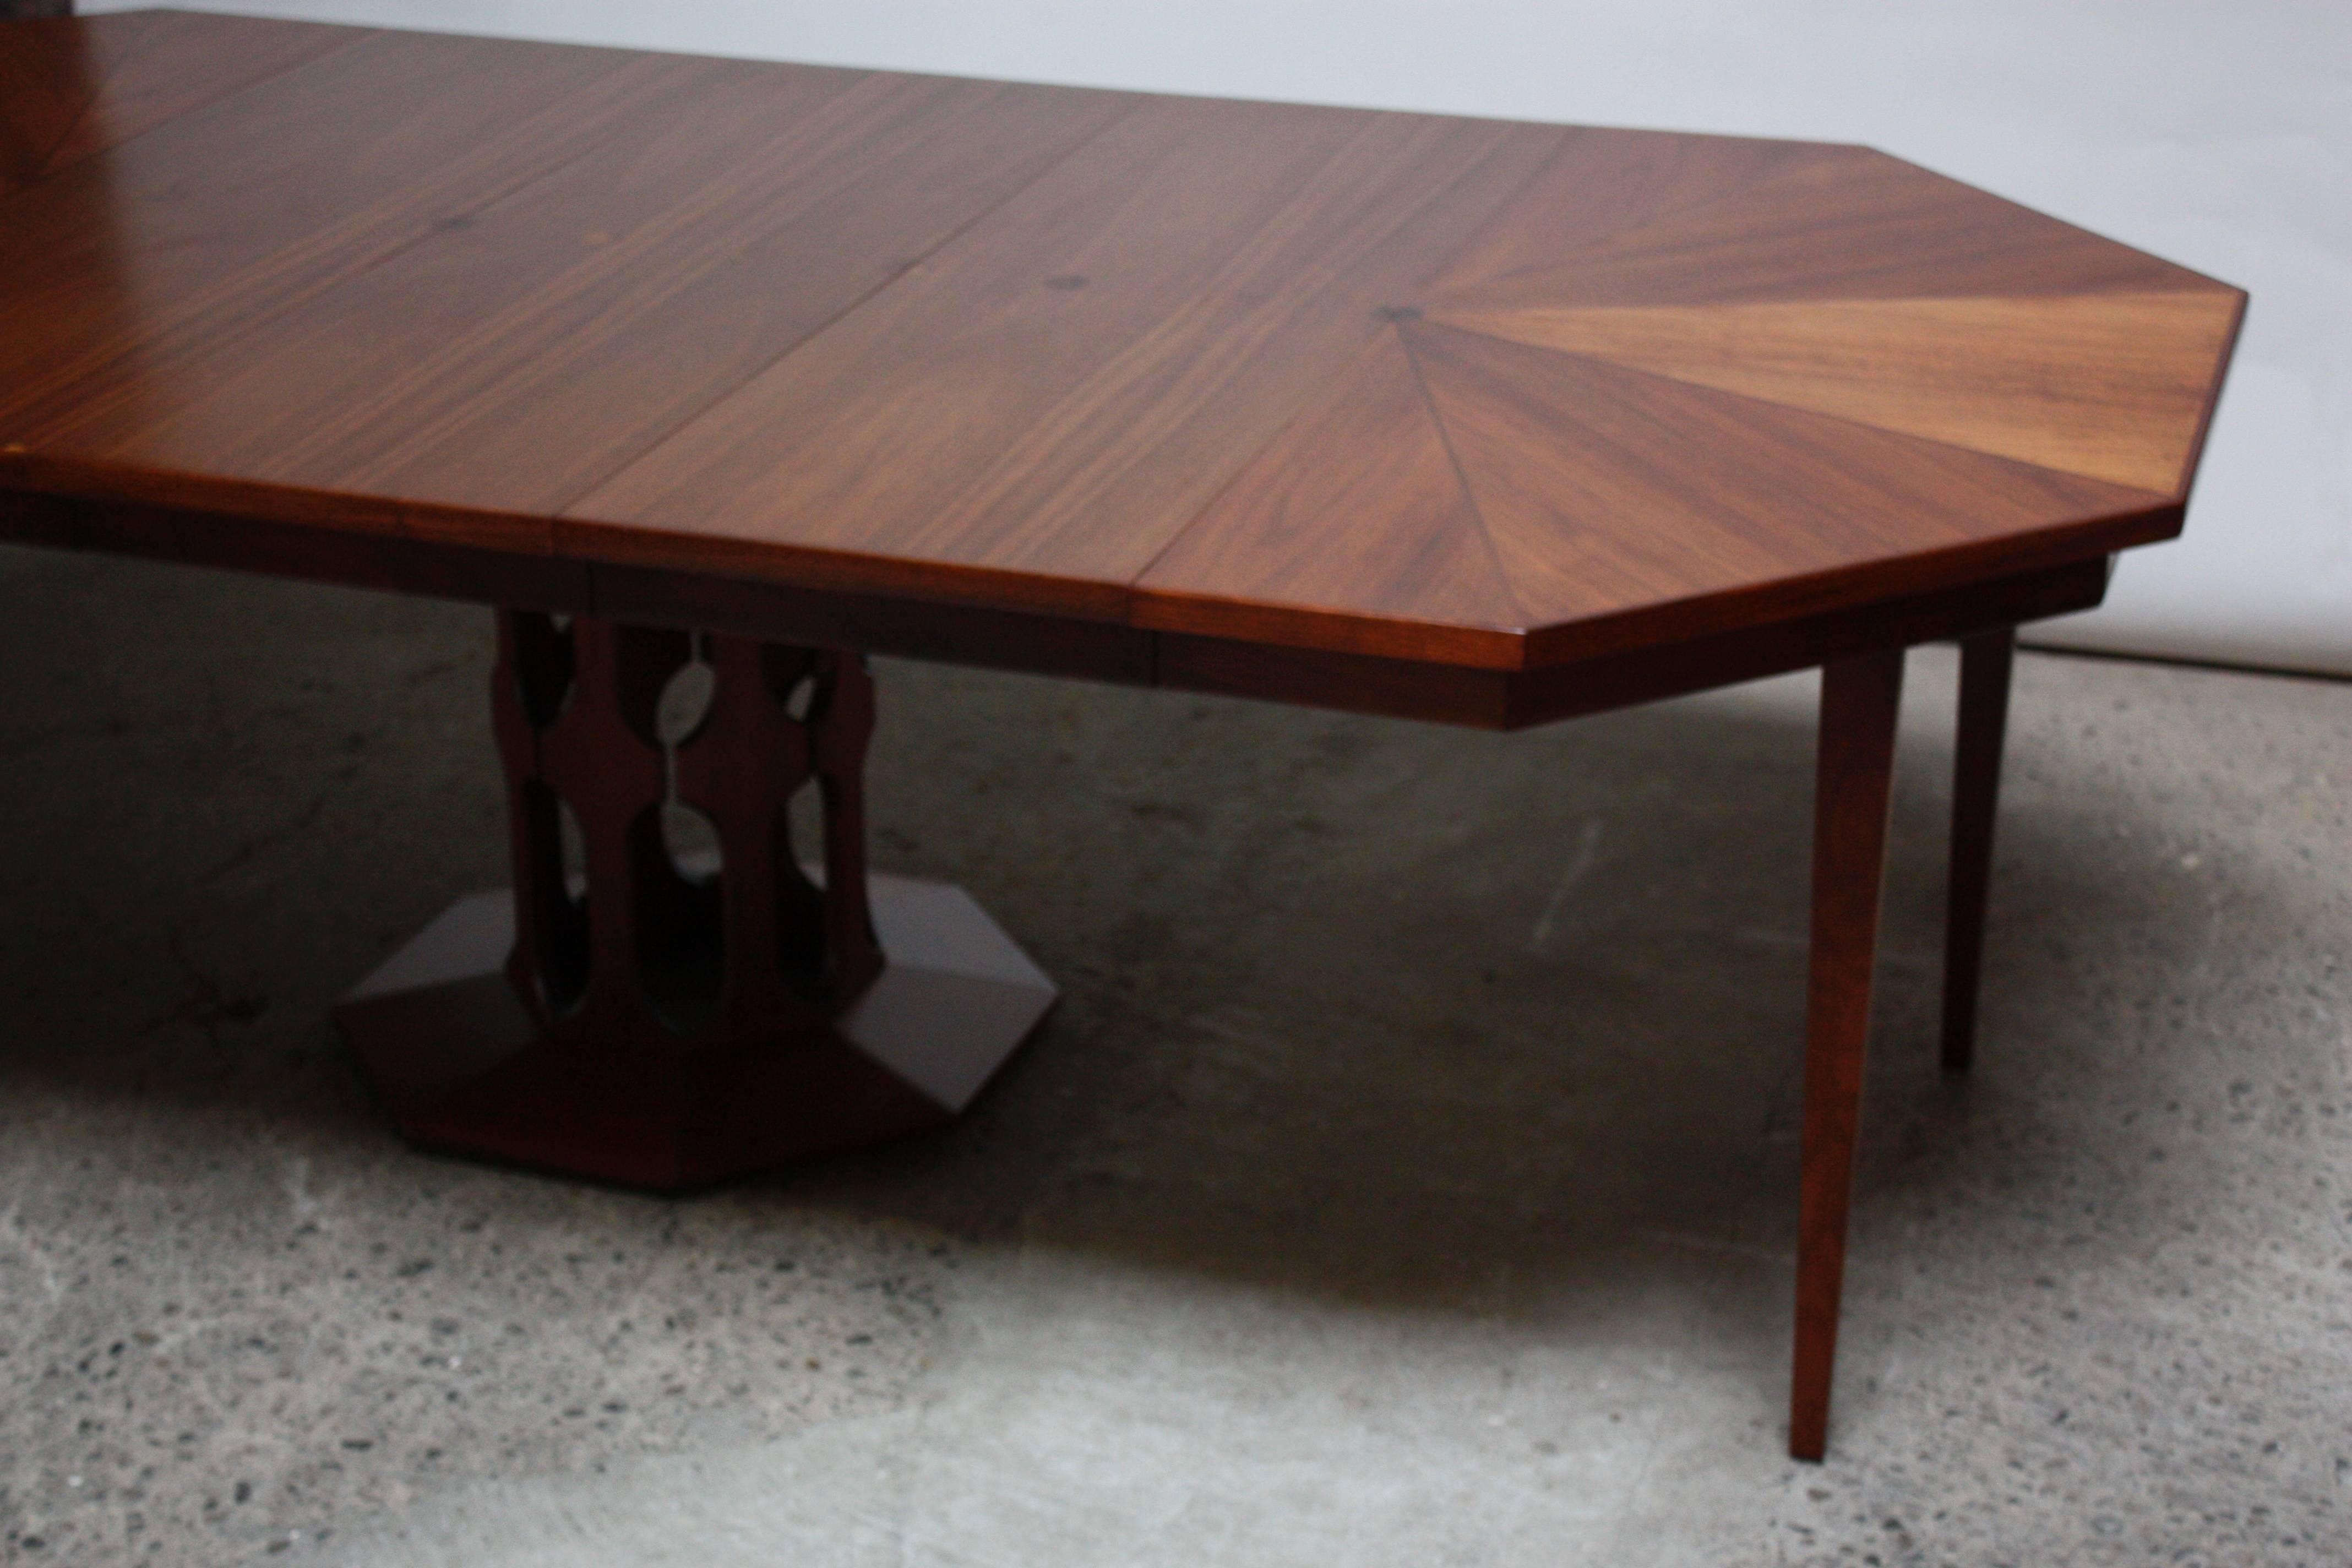 Octagonal Walnut Dining Table Attributed to Harvey Probber 1